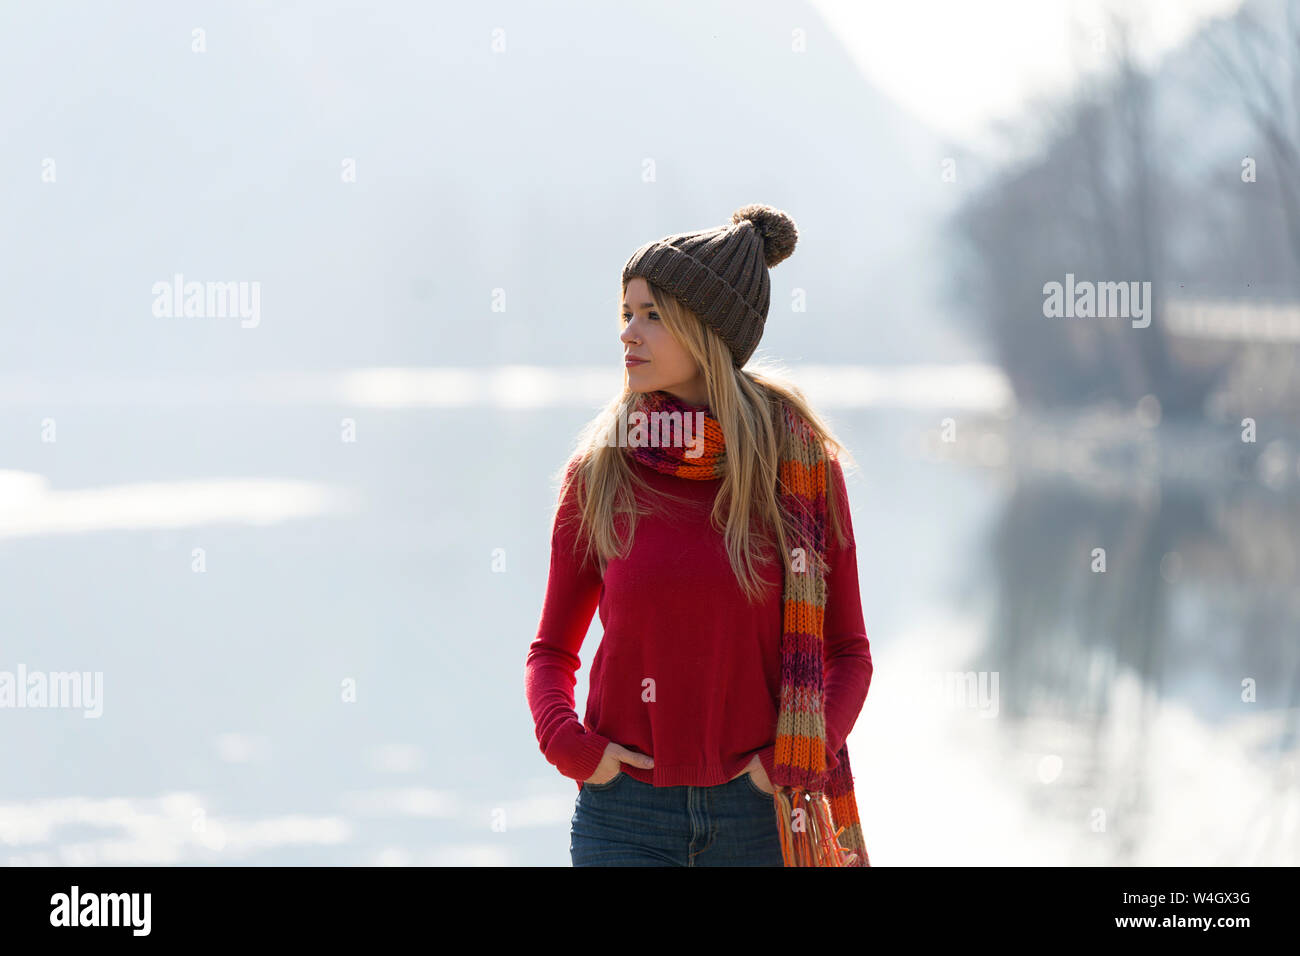 Young blond woman at a lake in winter Stock Photo